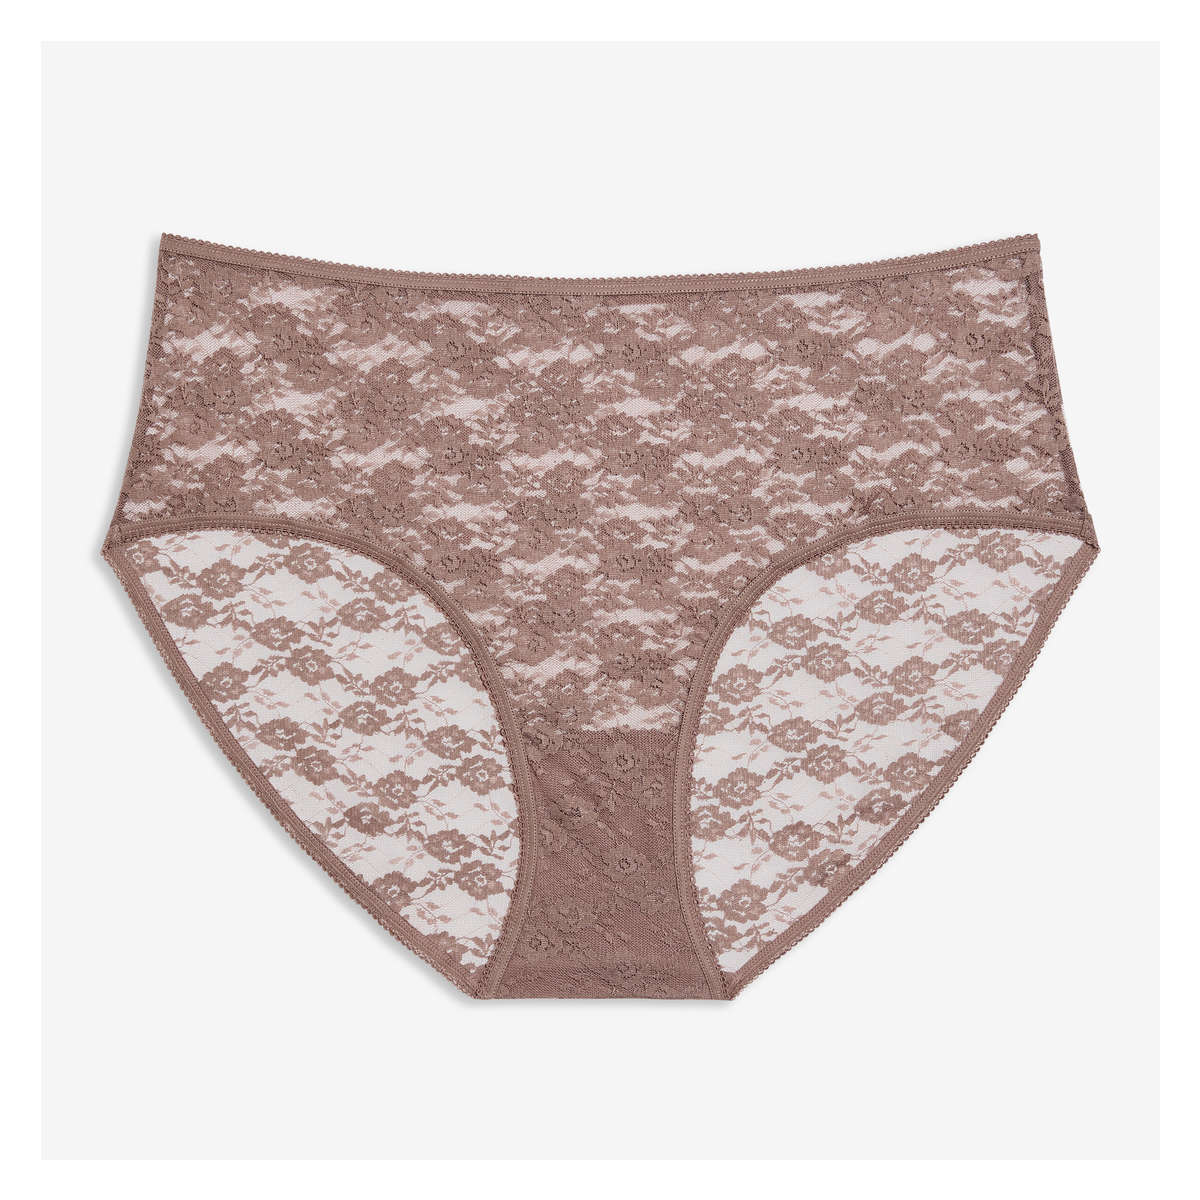 Lace Brief in Brown from Joe Fresh